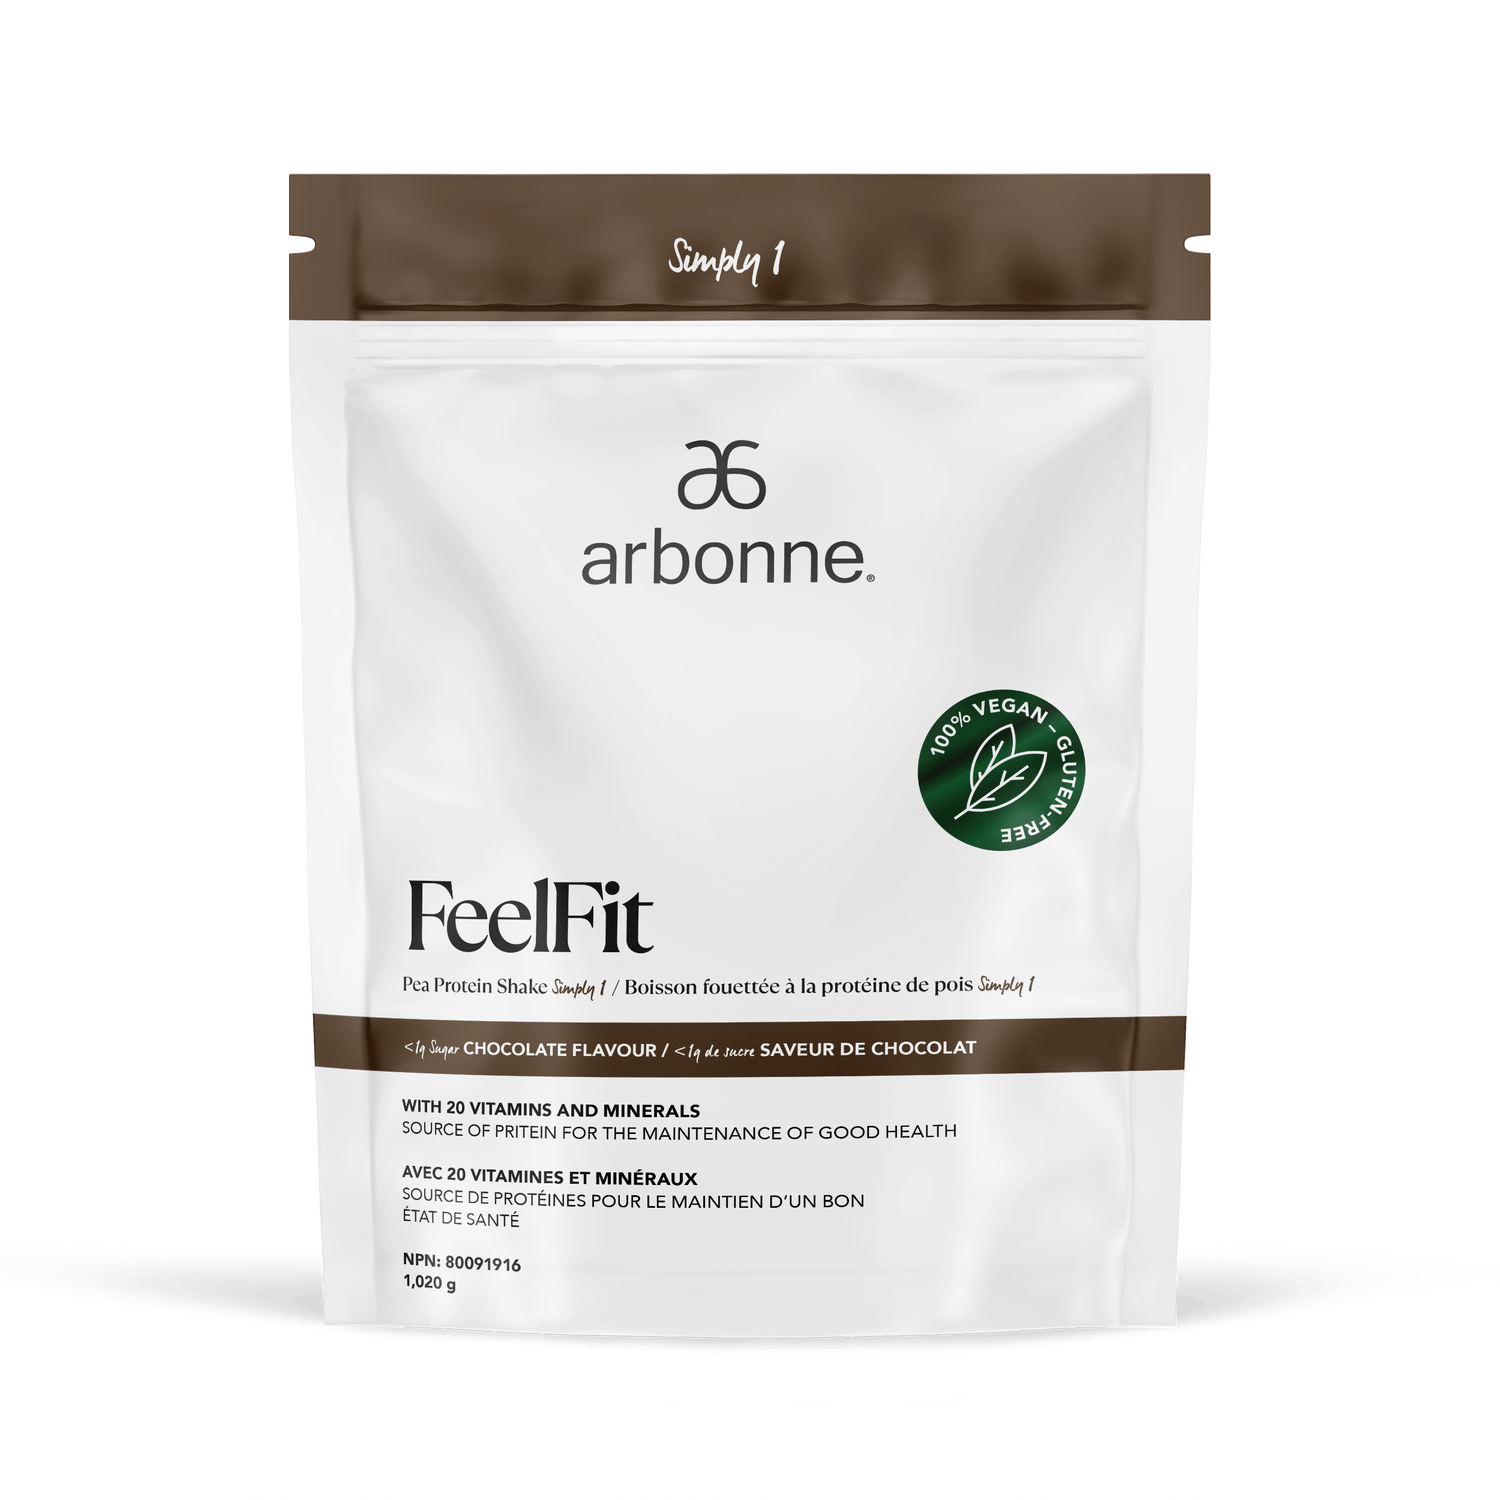 Arbonne FeelFit chocolate-flavored vegan pea protein powder, showcased in a classic white package with a brown accent and the signature green vegan certification seal.